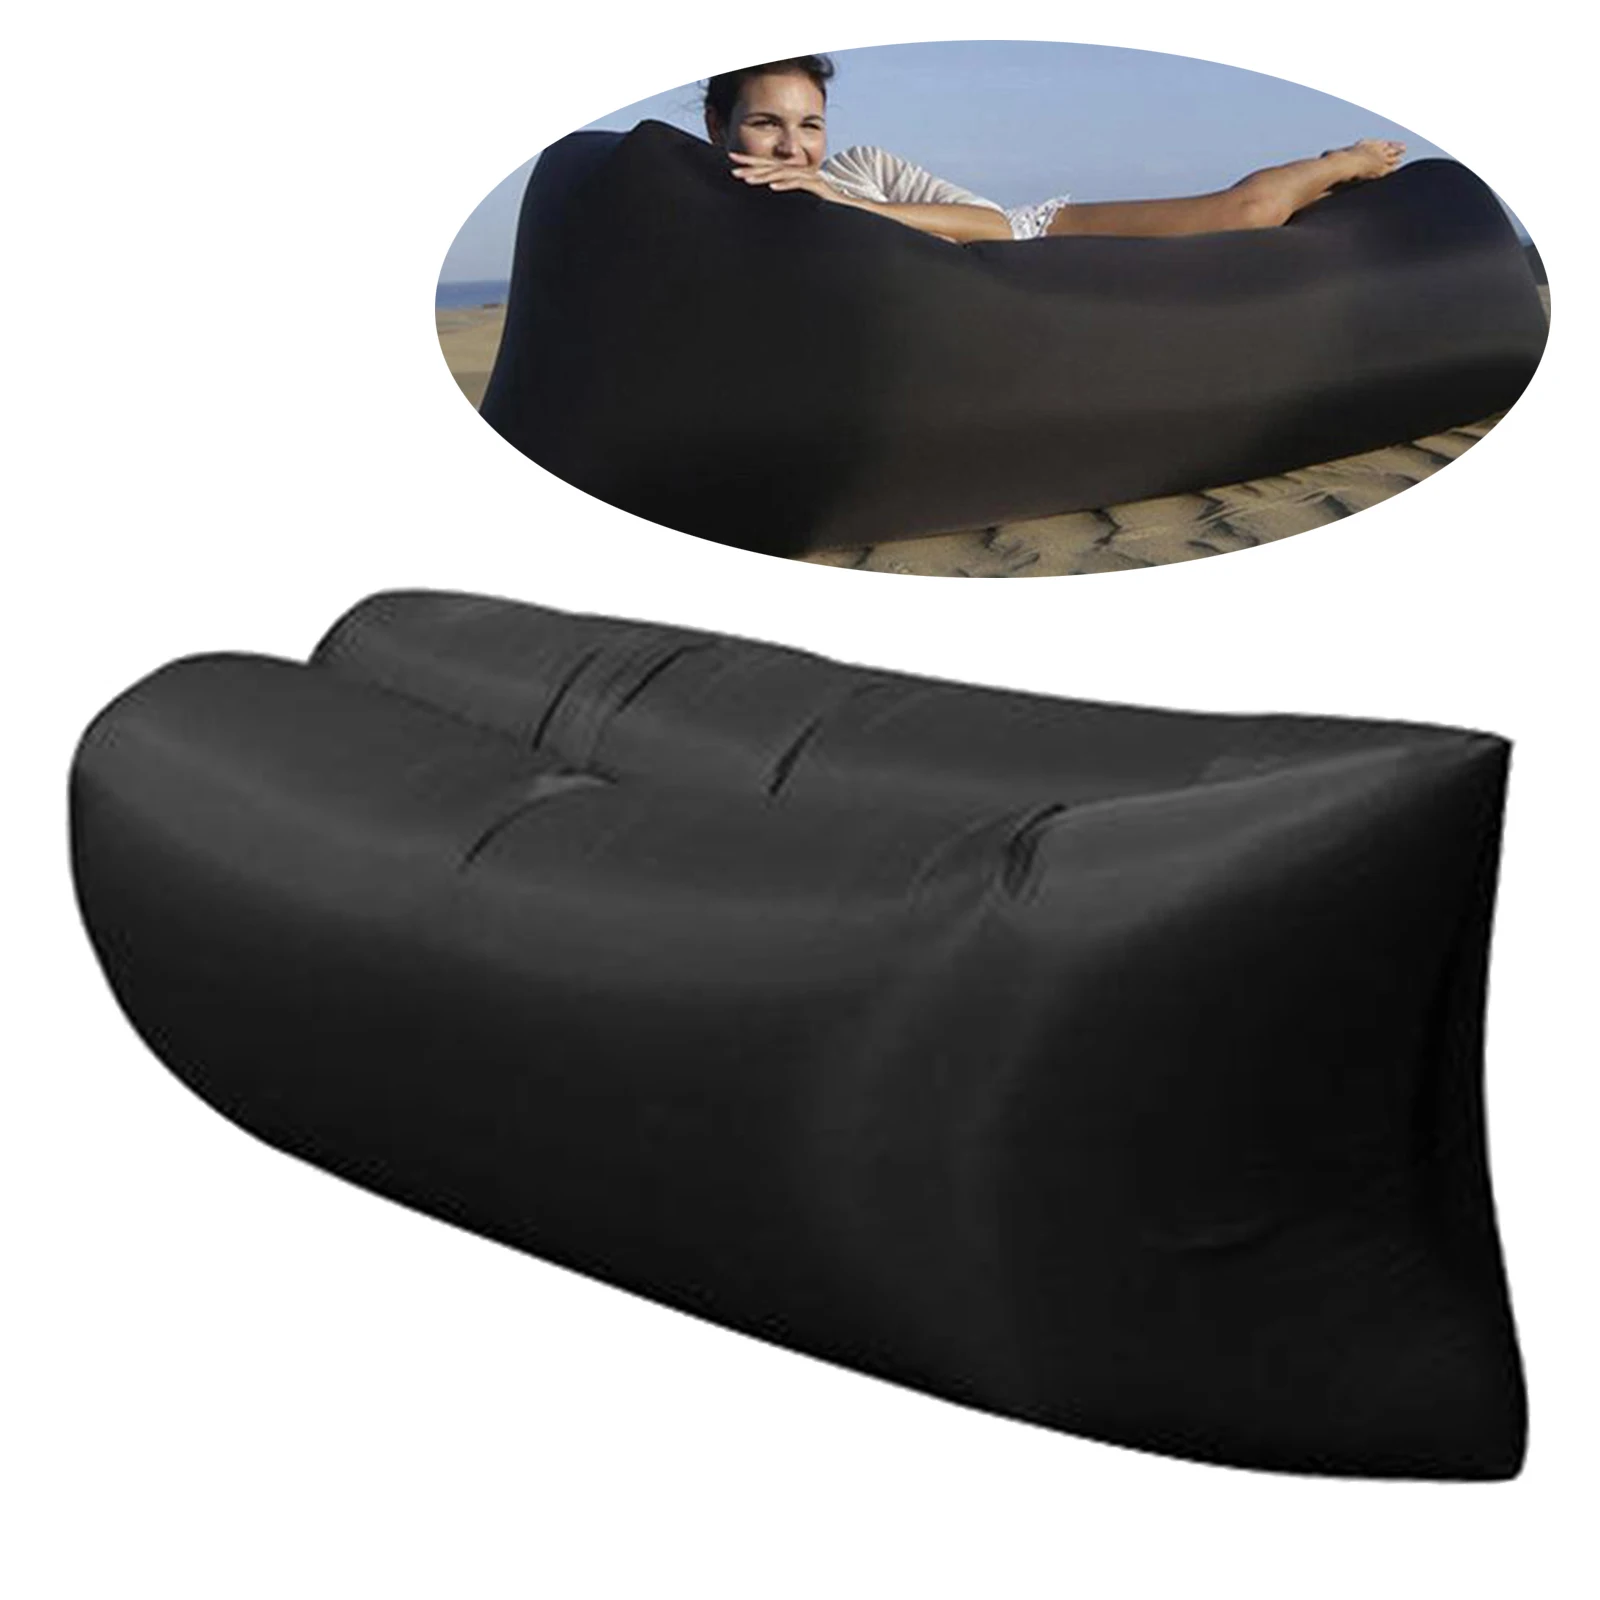 Inflatable Air Bed Sofa Lounger Couch Chair Bag Hangout Outdoor Camping Beach Inflatable Couch Sofa Indoor Outdoor Adults Kids